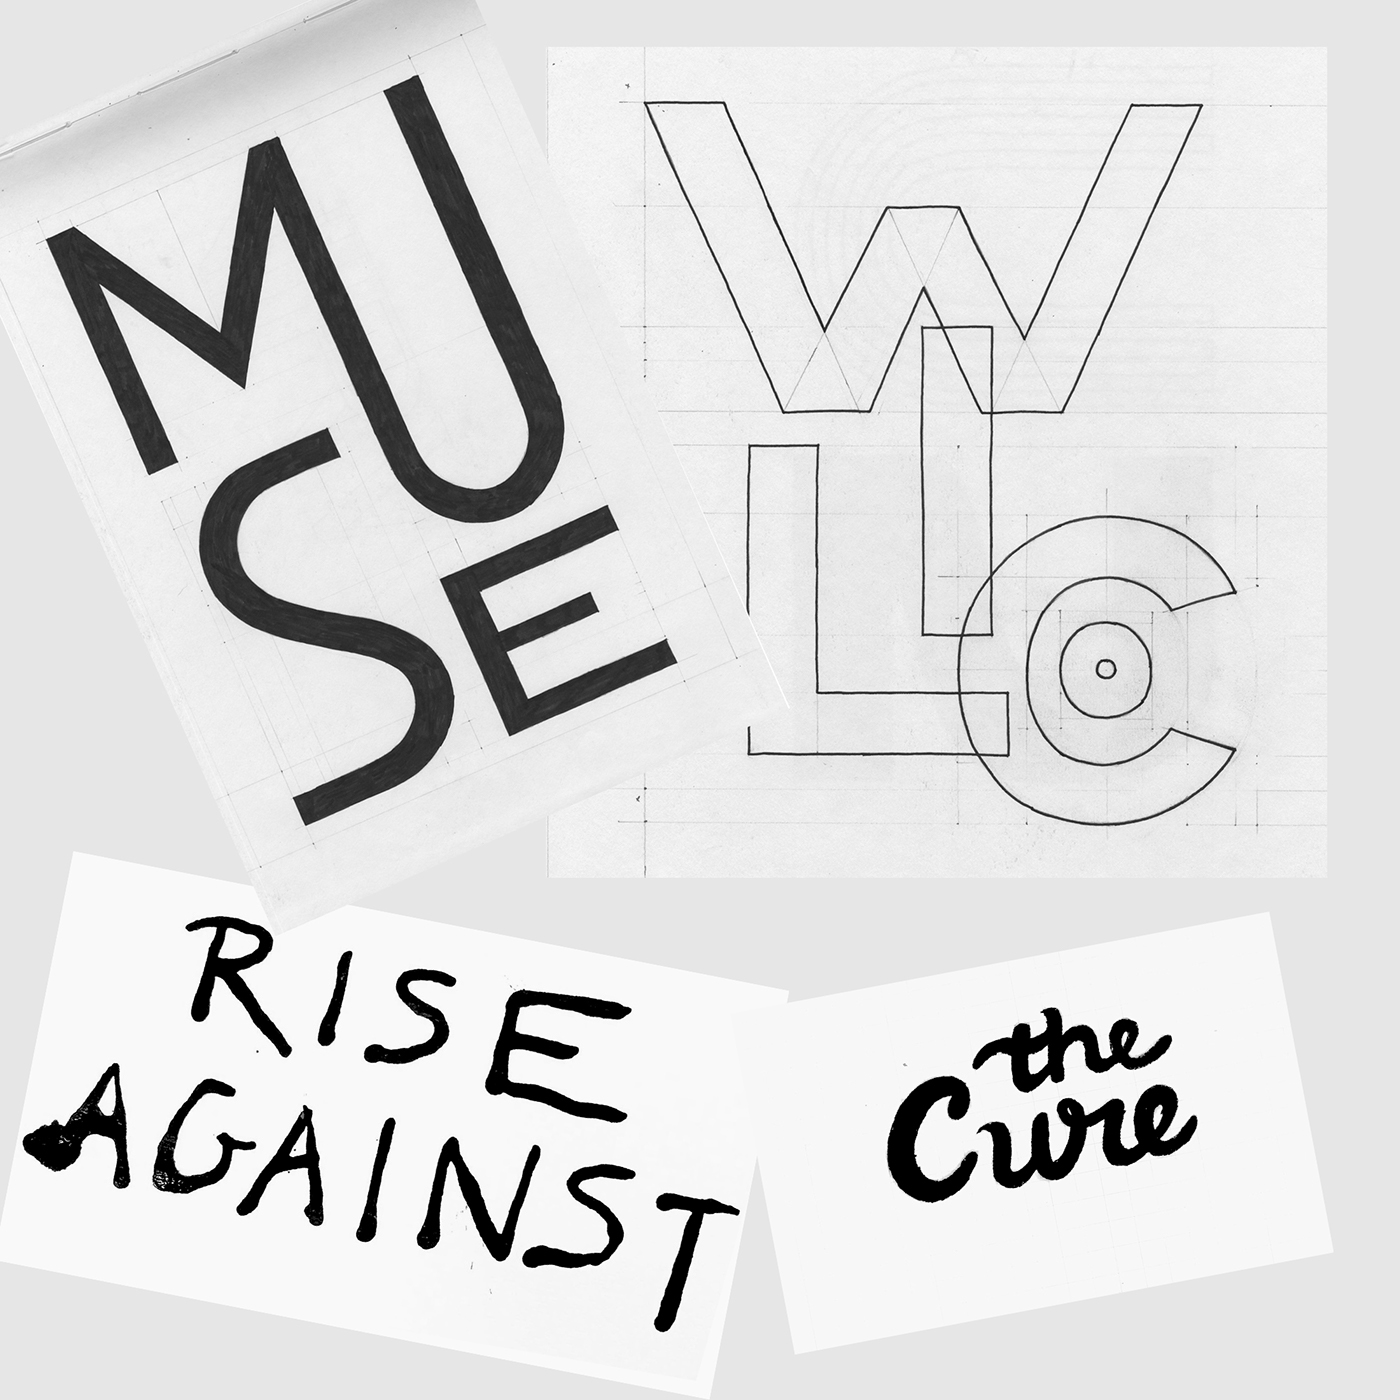 bandtype rock bands foo fighters the cure green day wilco Powderfinger muse the who pearl jam nirvana rise against lettering Handlettering